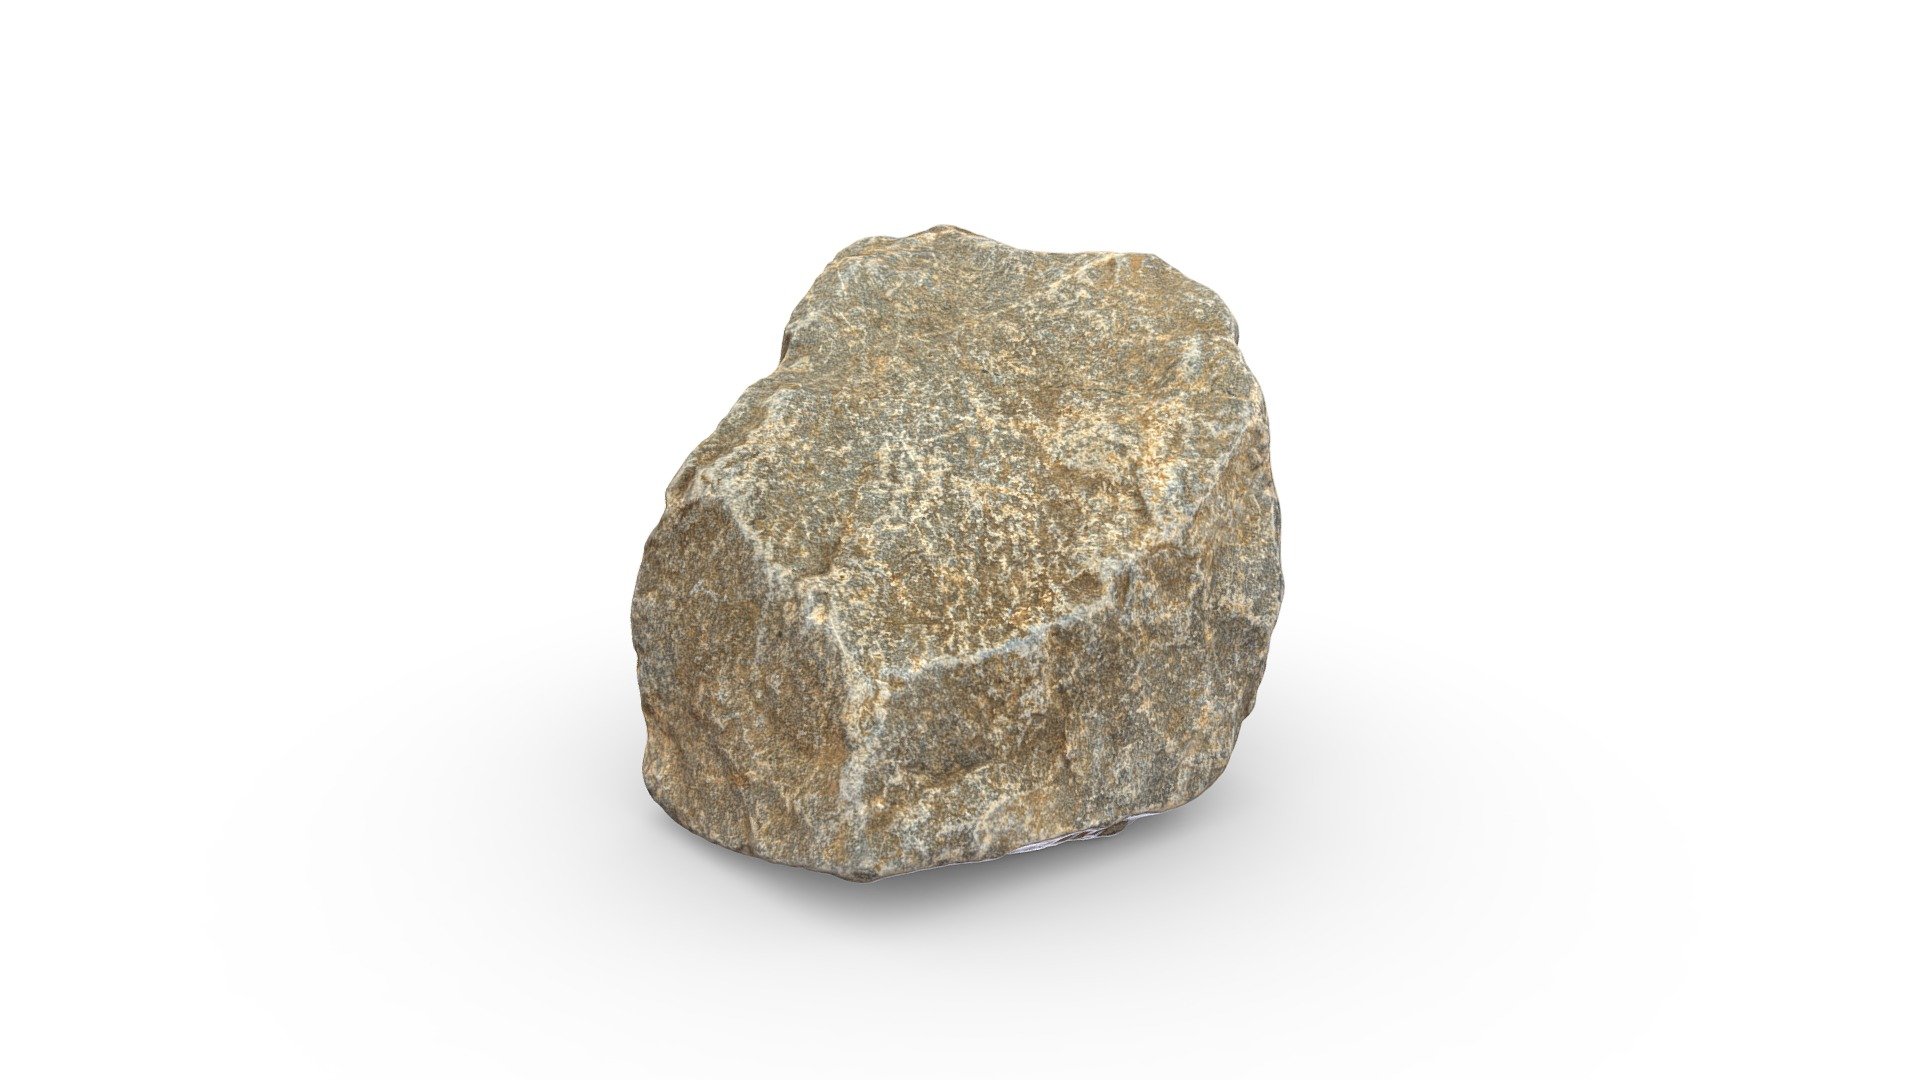 High-poly sharp stone photogrammetry scan. PBR texture maps 4096x4096 px. resolution for metallic or specular workflow. Scan from real stone, high-poly 3D model, 4K resolution textures.

Additional file contains low-poly 3d model version, game-ready in real time 3d model